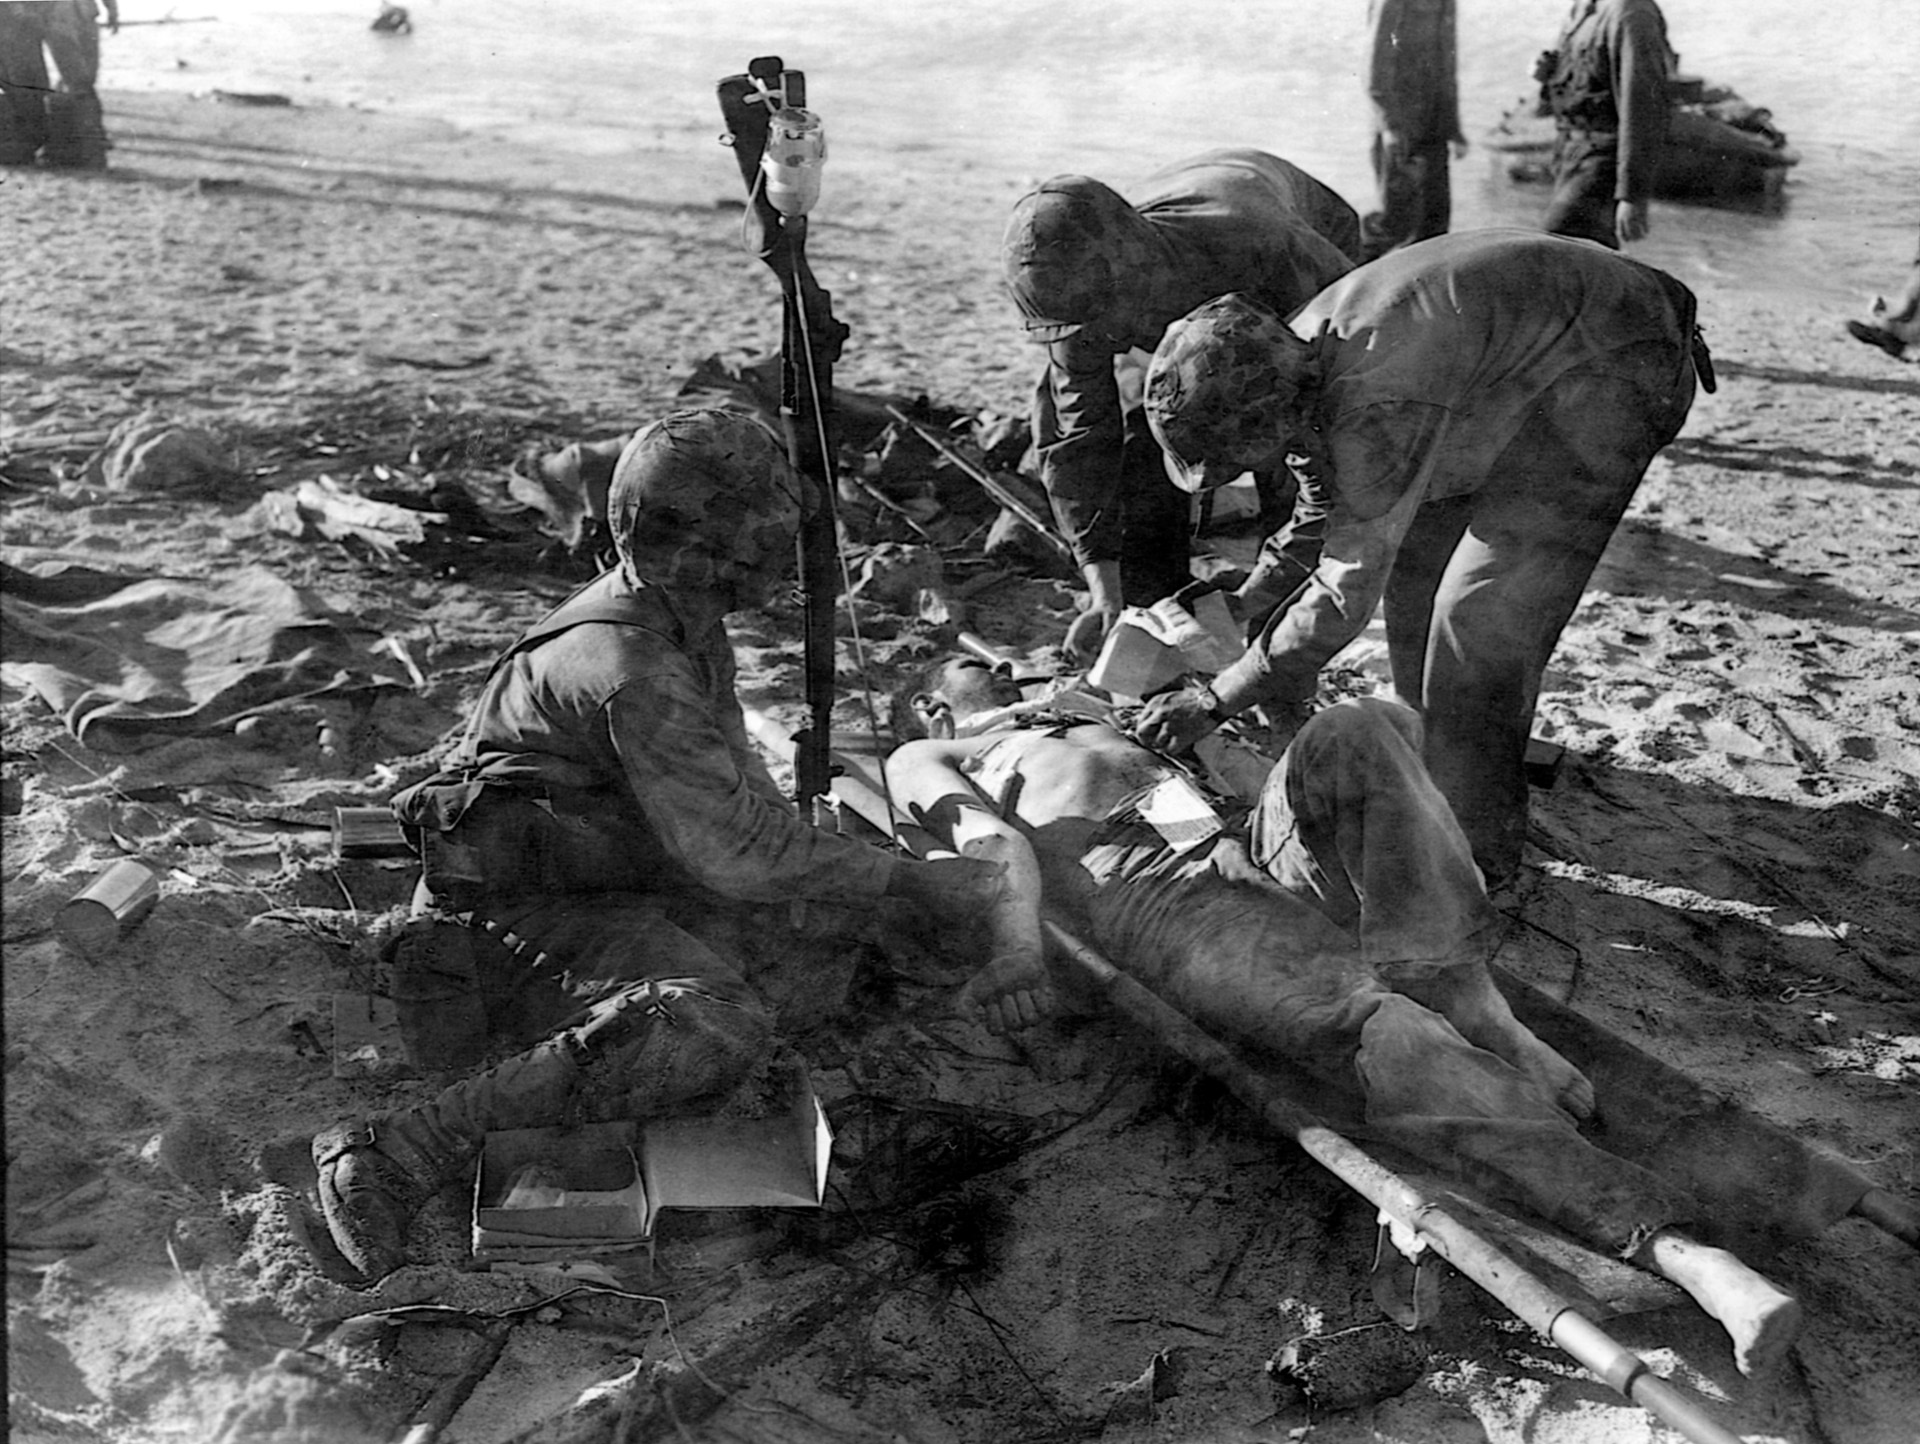 With a bottle of blood plasma positioned on the butt of an upended rifle, a Marine receives a lifesaving blood transfusion on the beach at Tarawa.